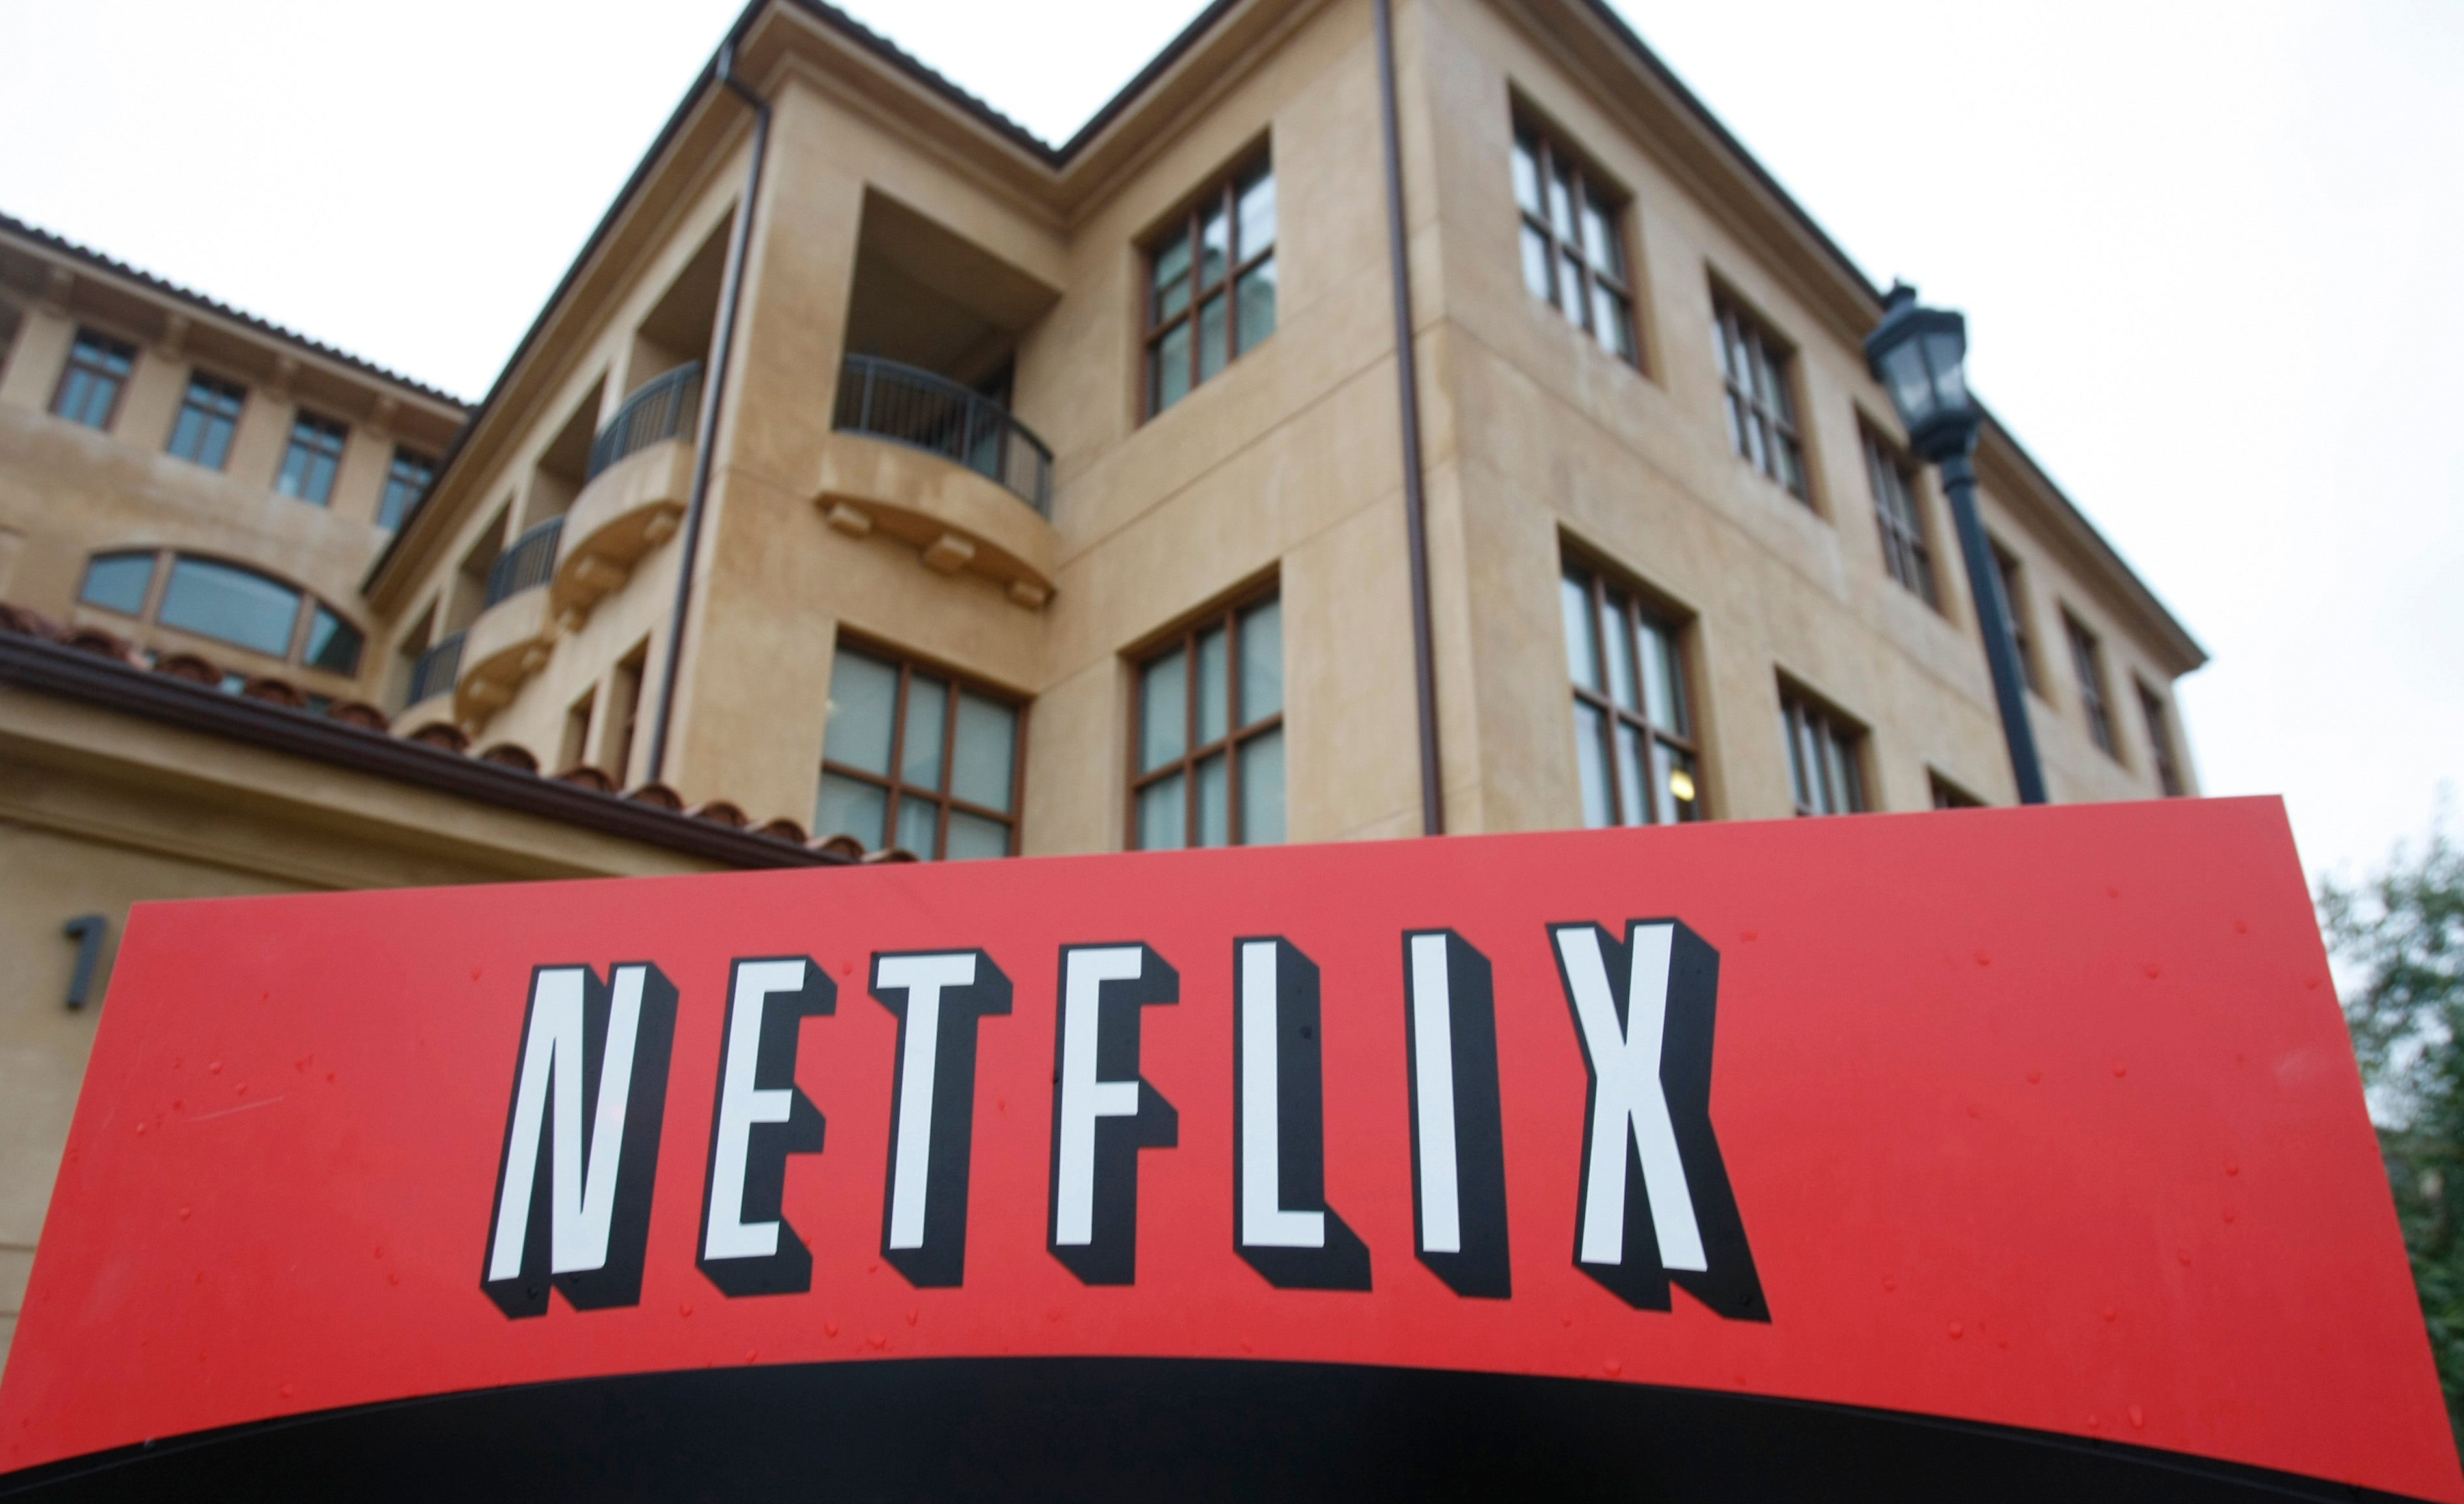 Netflix’s first-quarter results were announced on Thursday